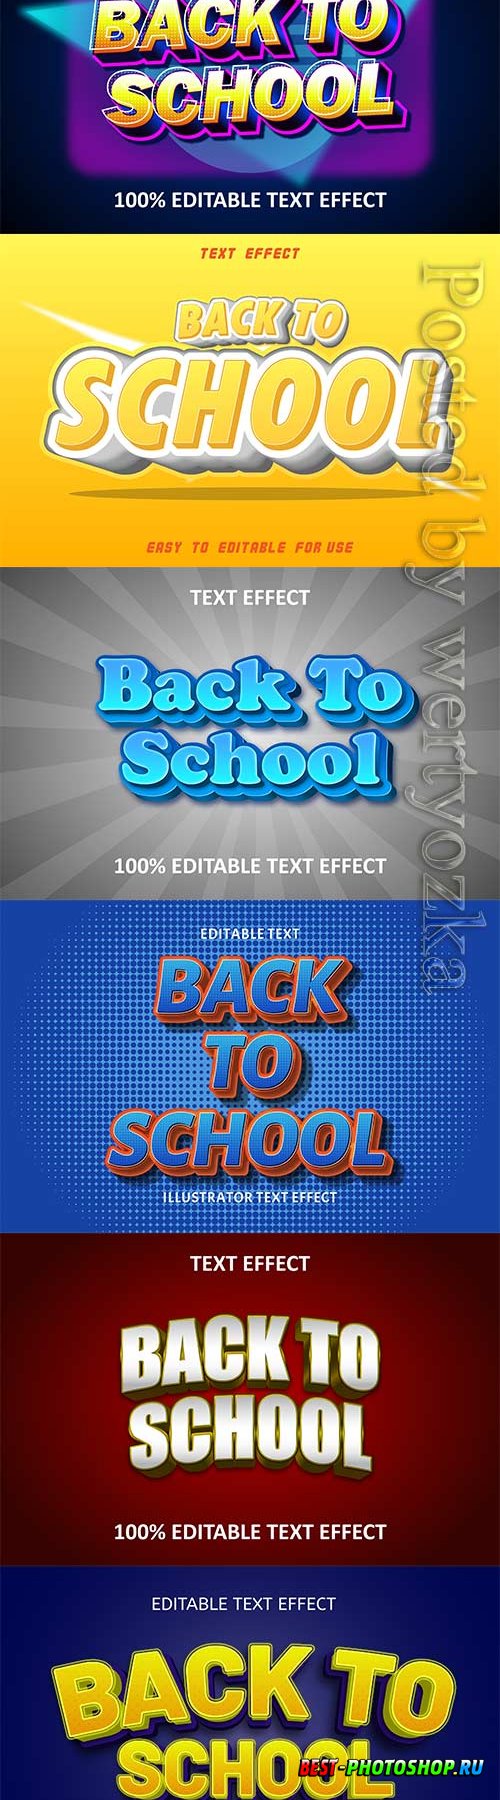 Back to school editable text effect vol 12